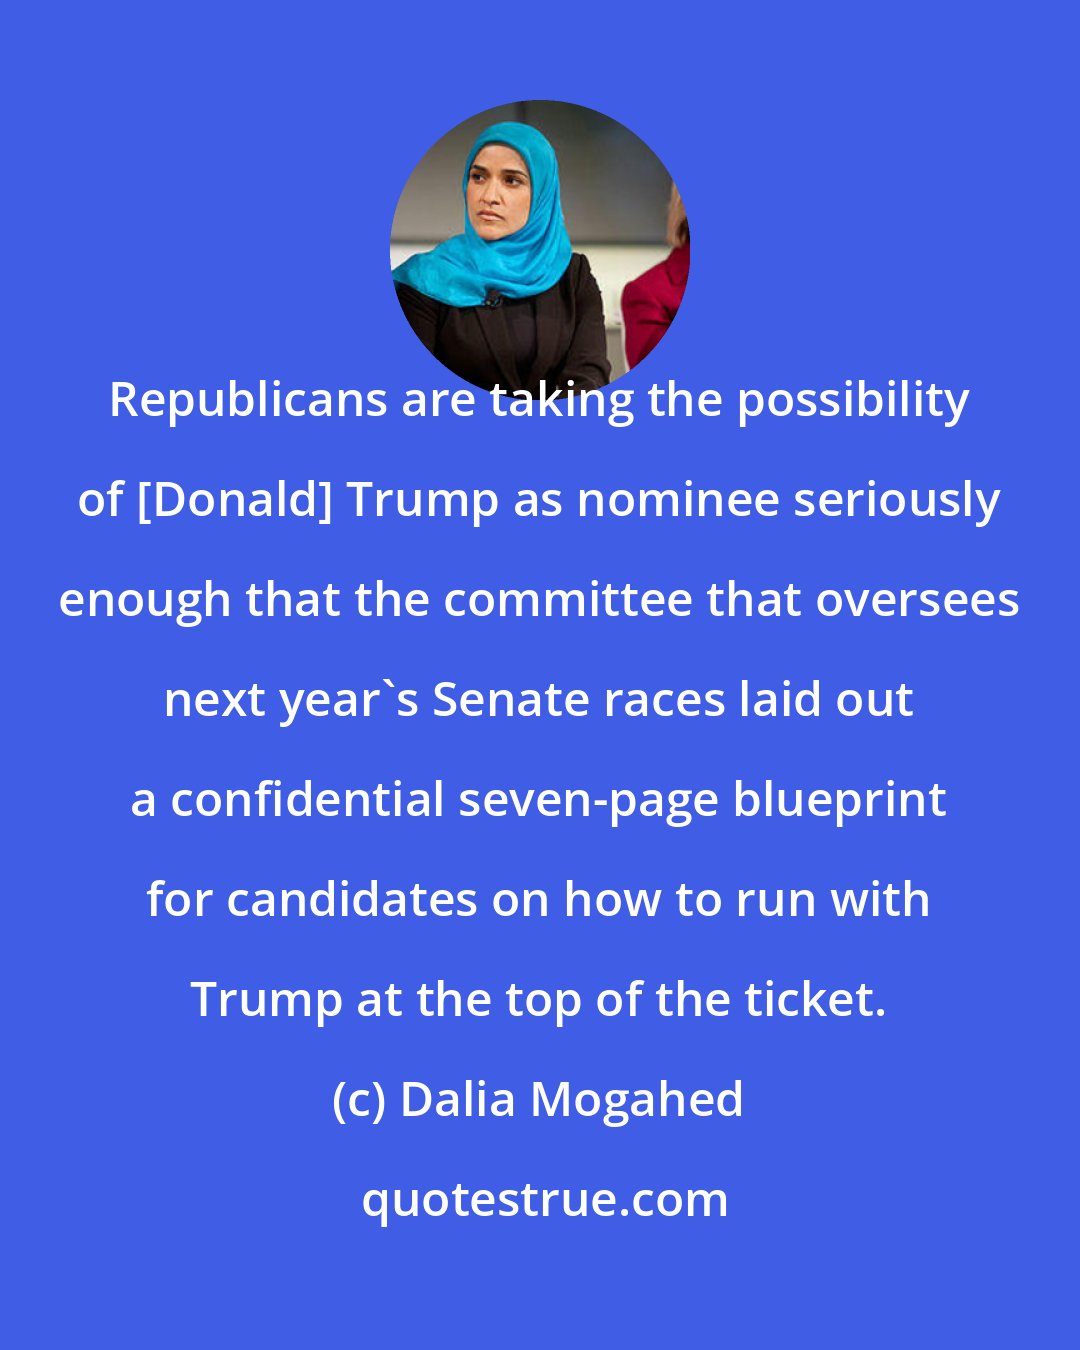 Dalia Mogahed: Republicans are taking the possibility of [Donald] Trump as nominee seriously enough that the committee that oversees next year's Senate races laid out a confidential seven-page blueprint for candidates on how to run with Trump at the top of the ticket.